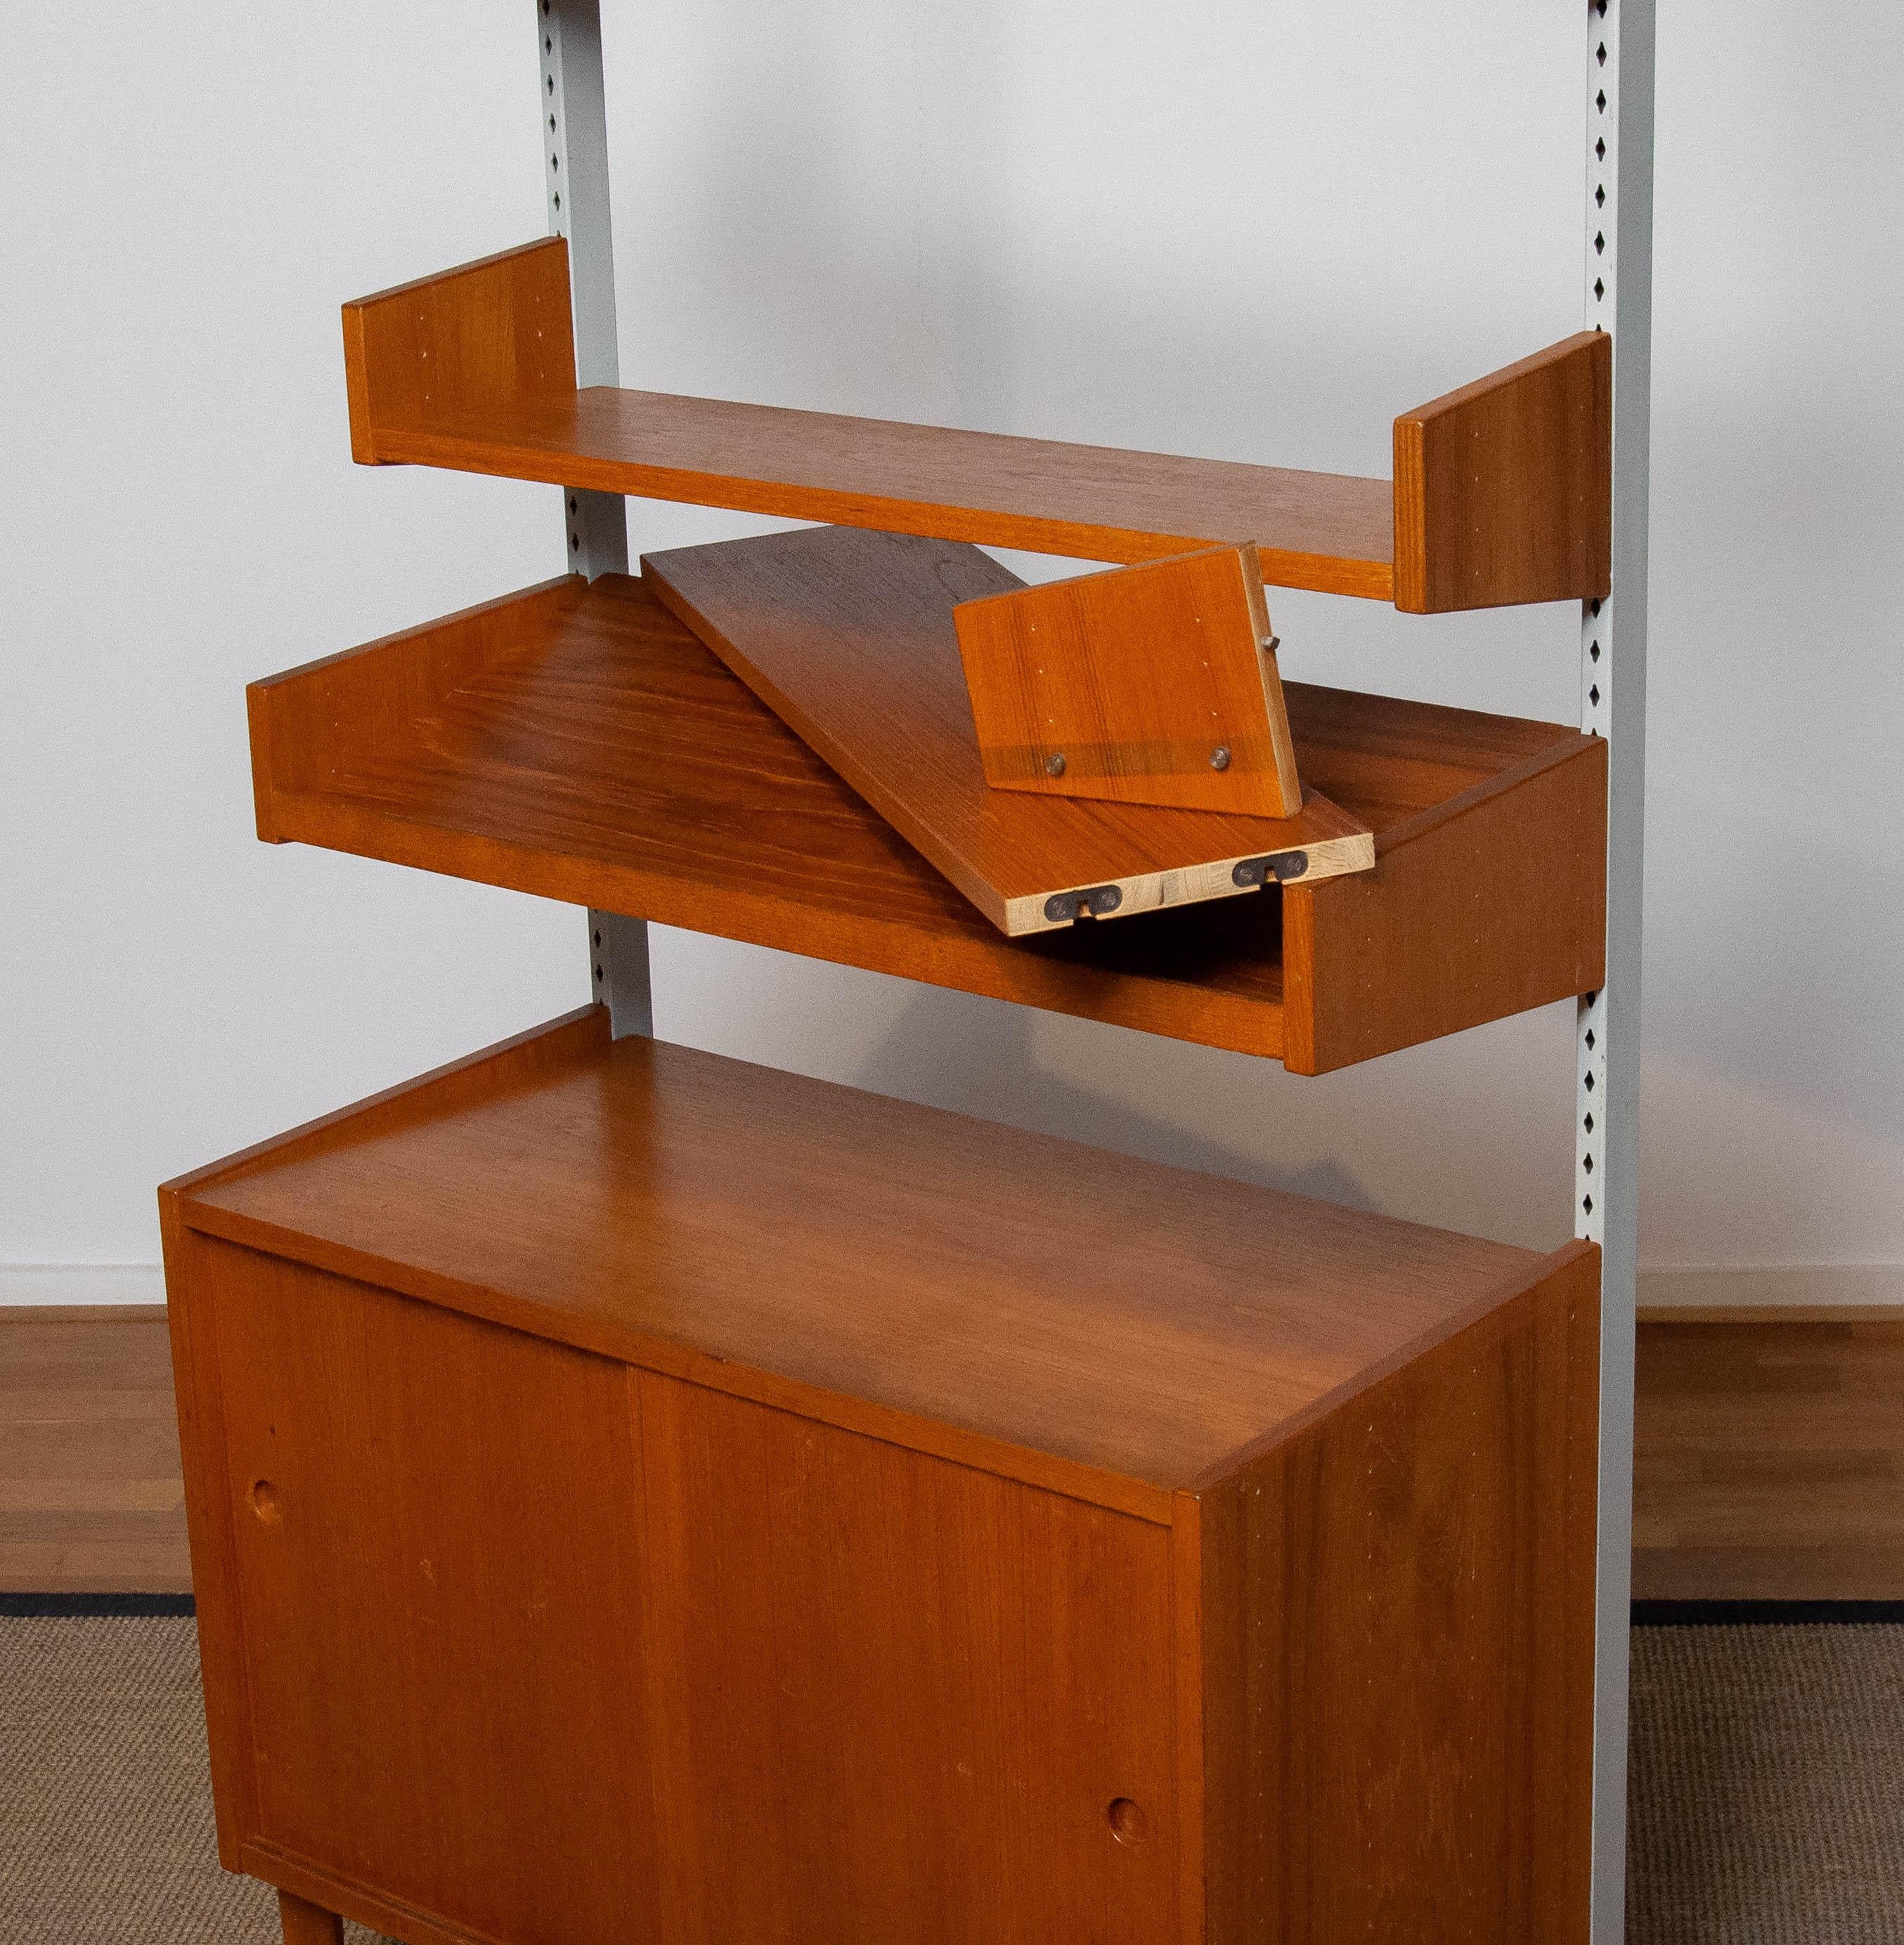 Teak Shelf System / Bookcase In Teak With Steel Bars By Harald Lundqvist 1950's 3